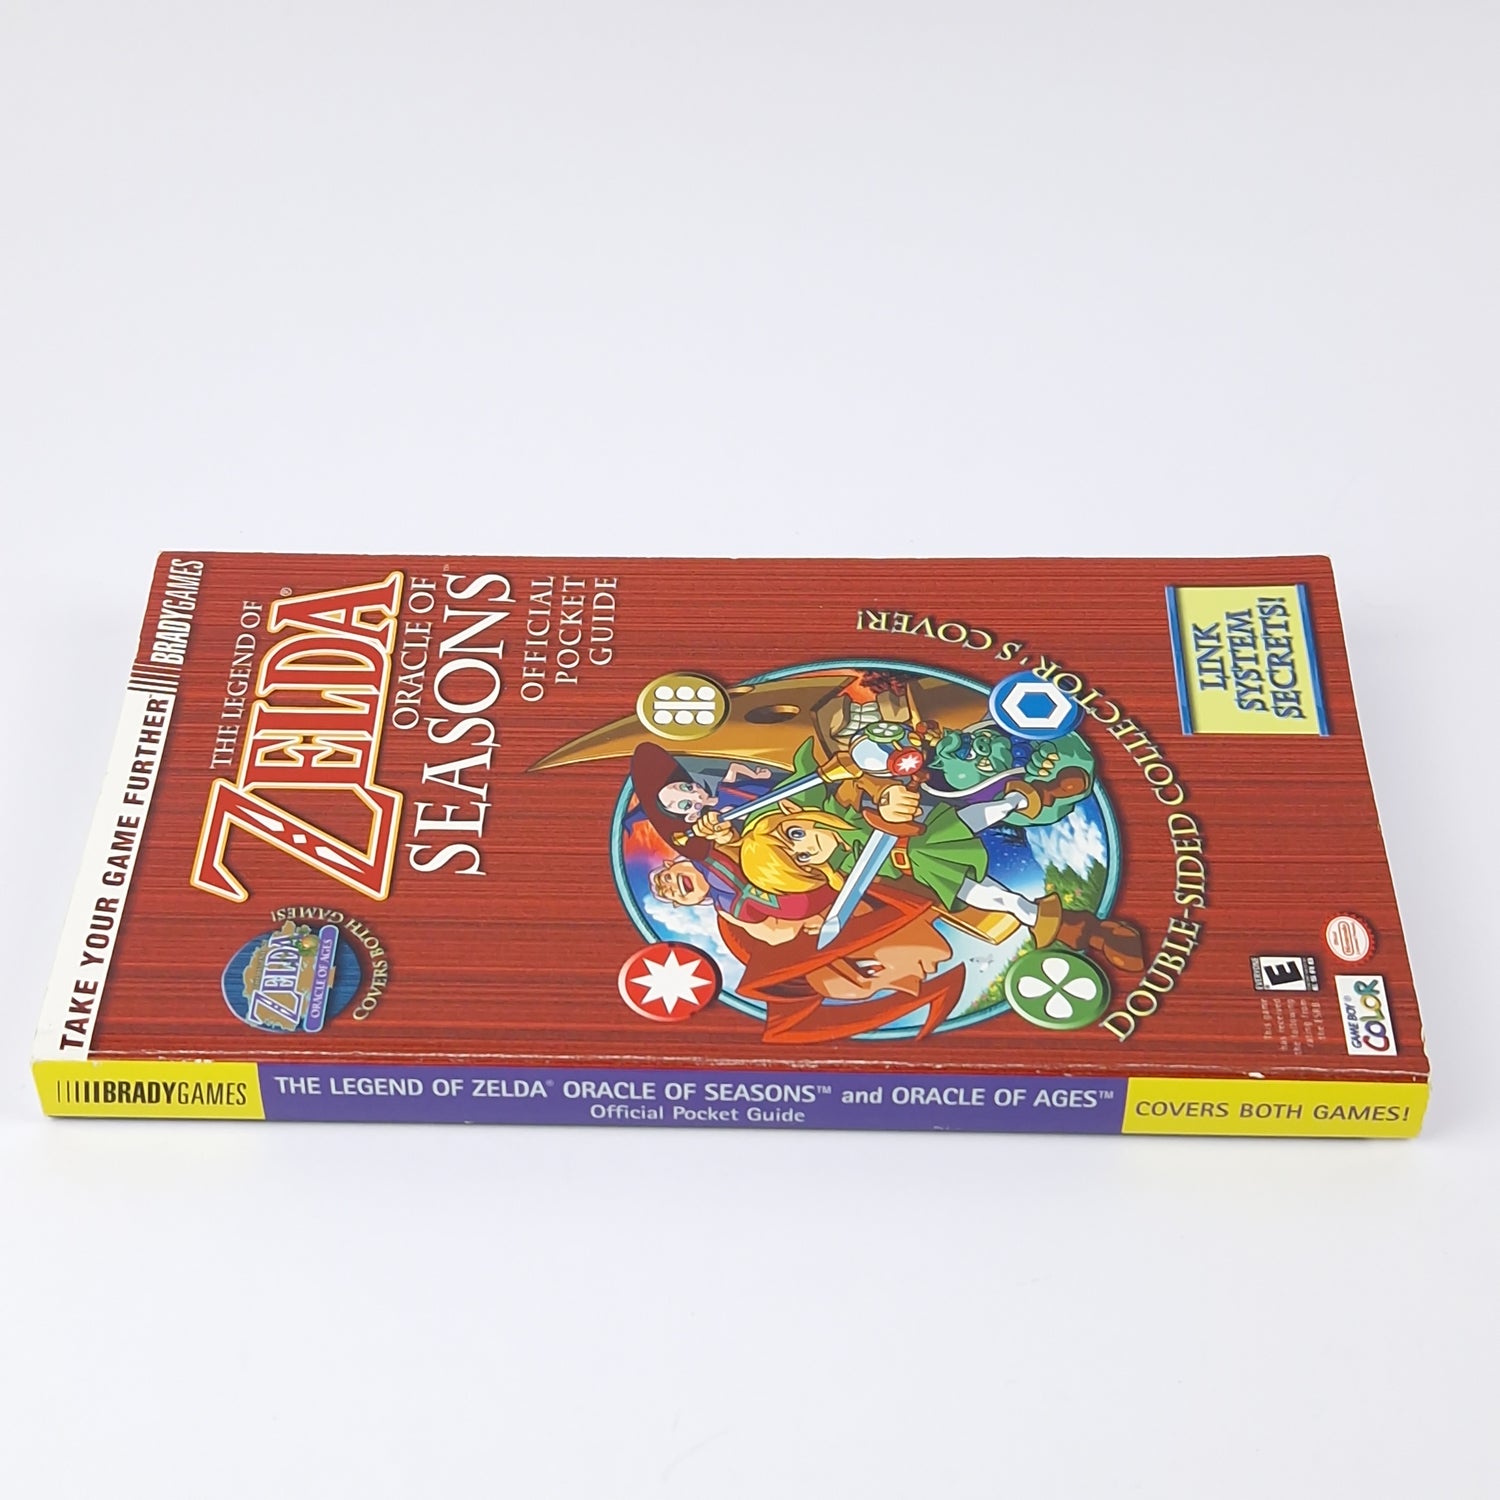 Bradygames official Pocket Guide Book : Zelda Oracle of Ages & Seasons